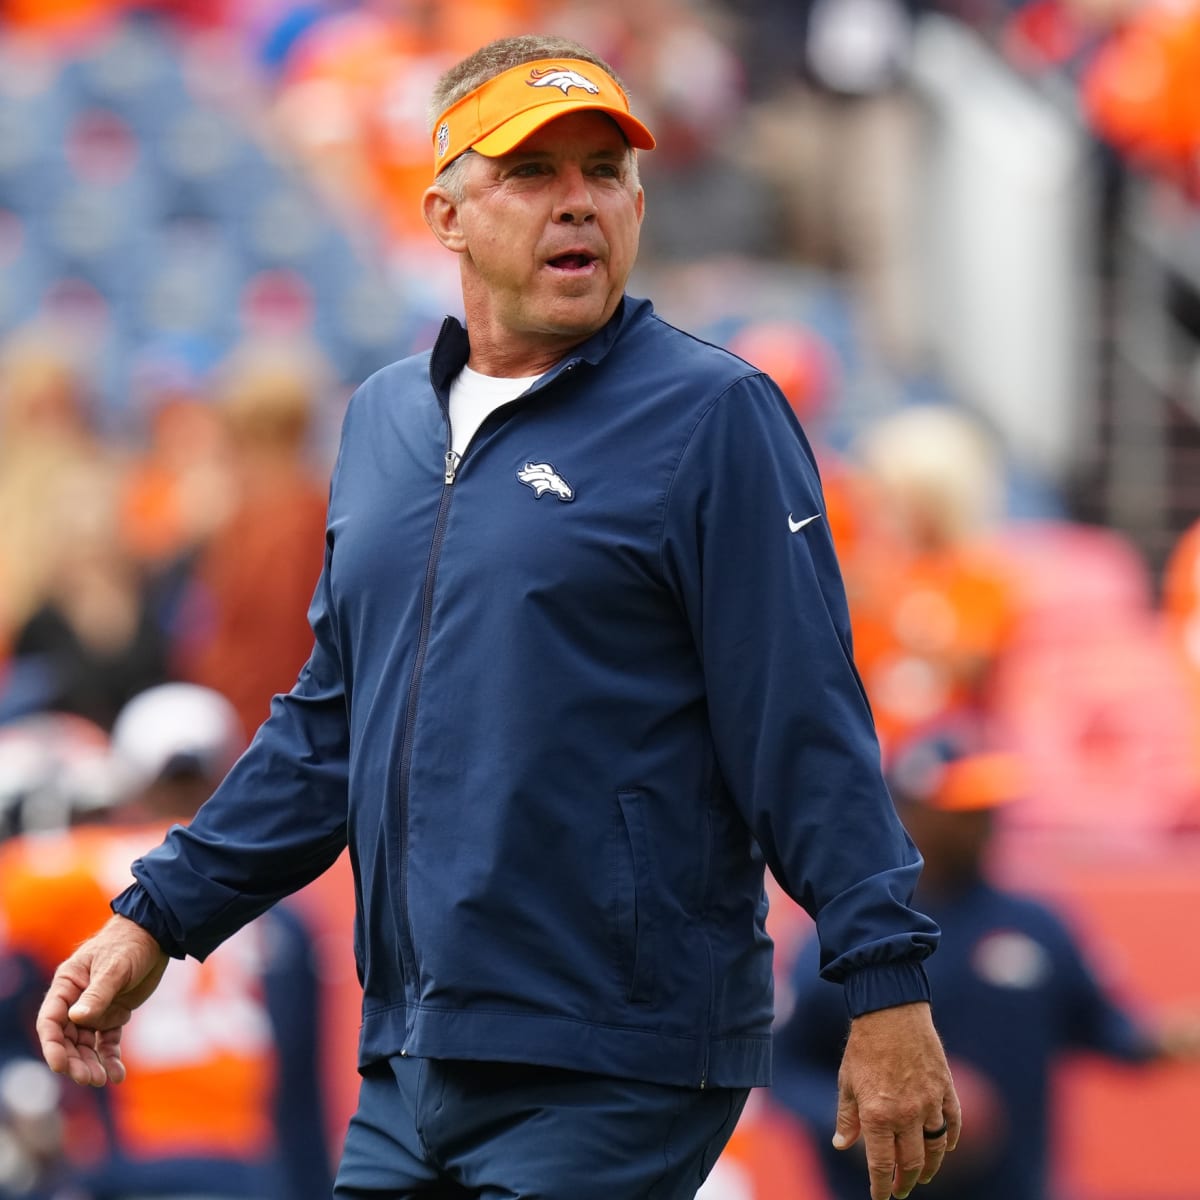 He will bounce back': John Elway has no doubt Broncos' Sean Payton